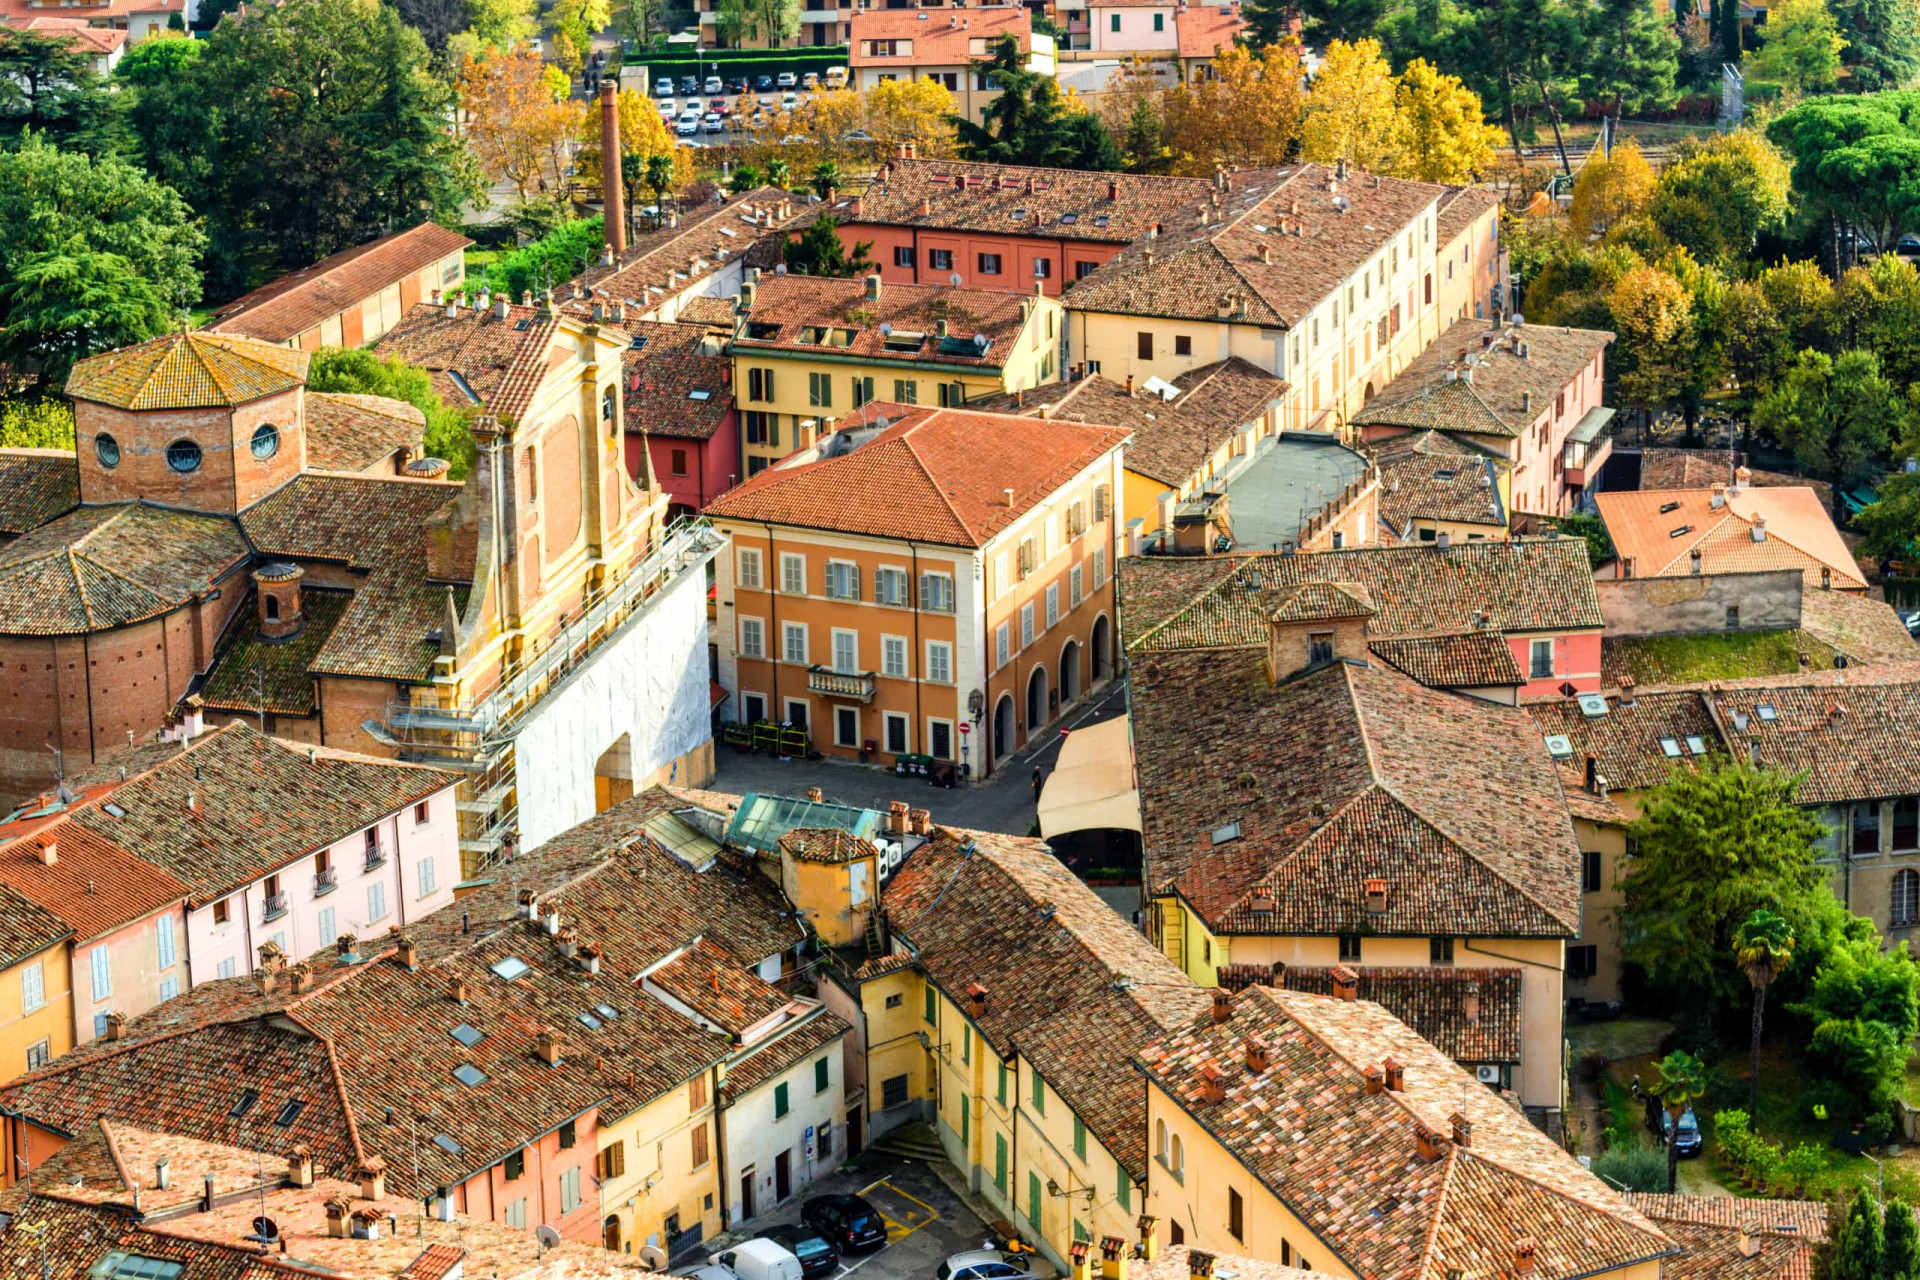 <p>Brisighella is a maze of small alleyways and elevated roads, many of them covered by a bewildering array of arches. Surrounding the town are three landmark buildings: a 13th-century castle, a 16th-century church, and a 19th-century clock tower.</p>